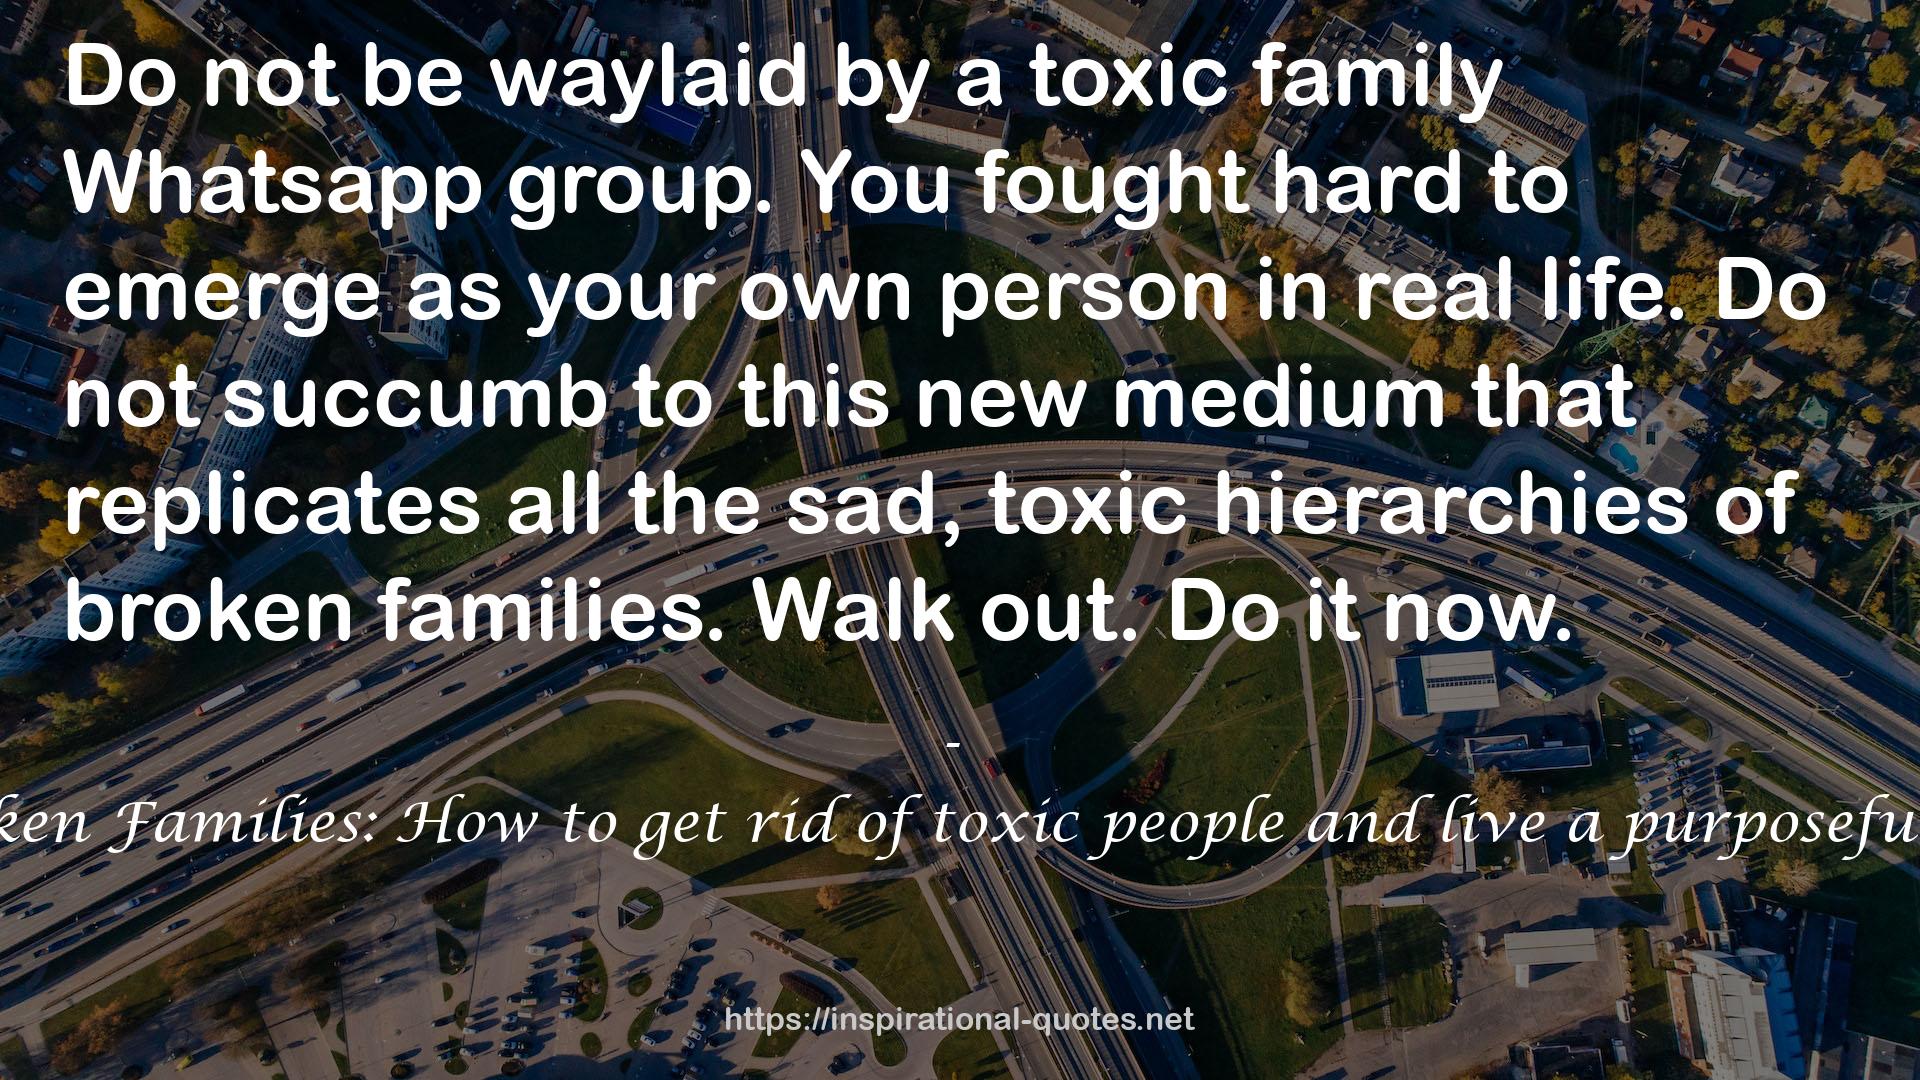 Broken Families: How to get rid of toxic people and live a purposeful life QUOTES